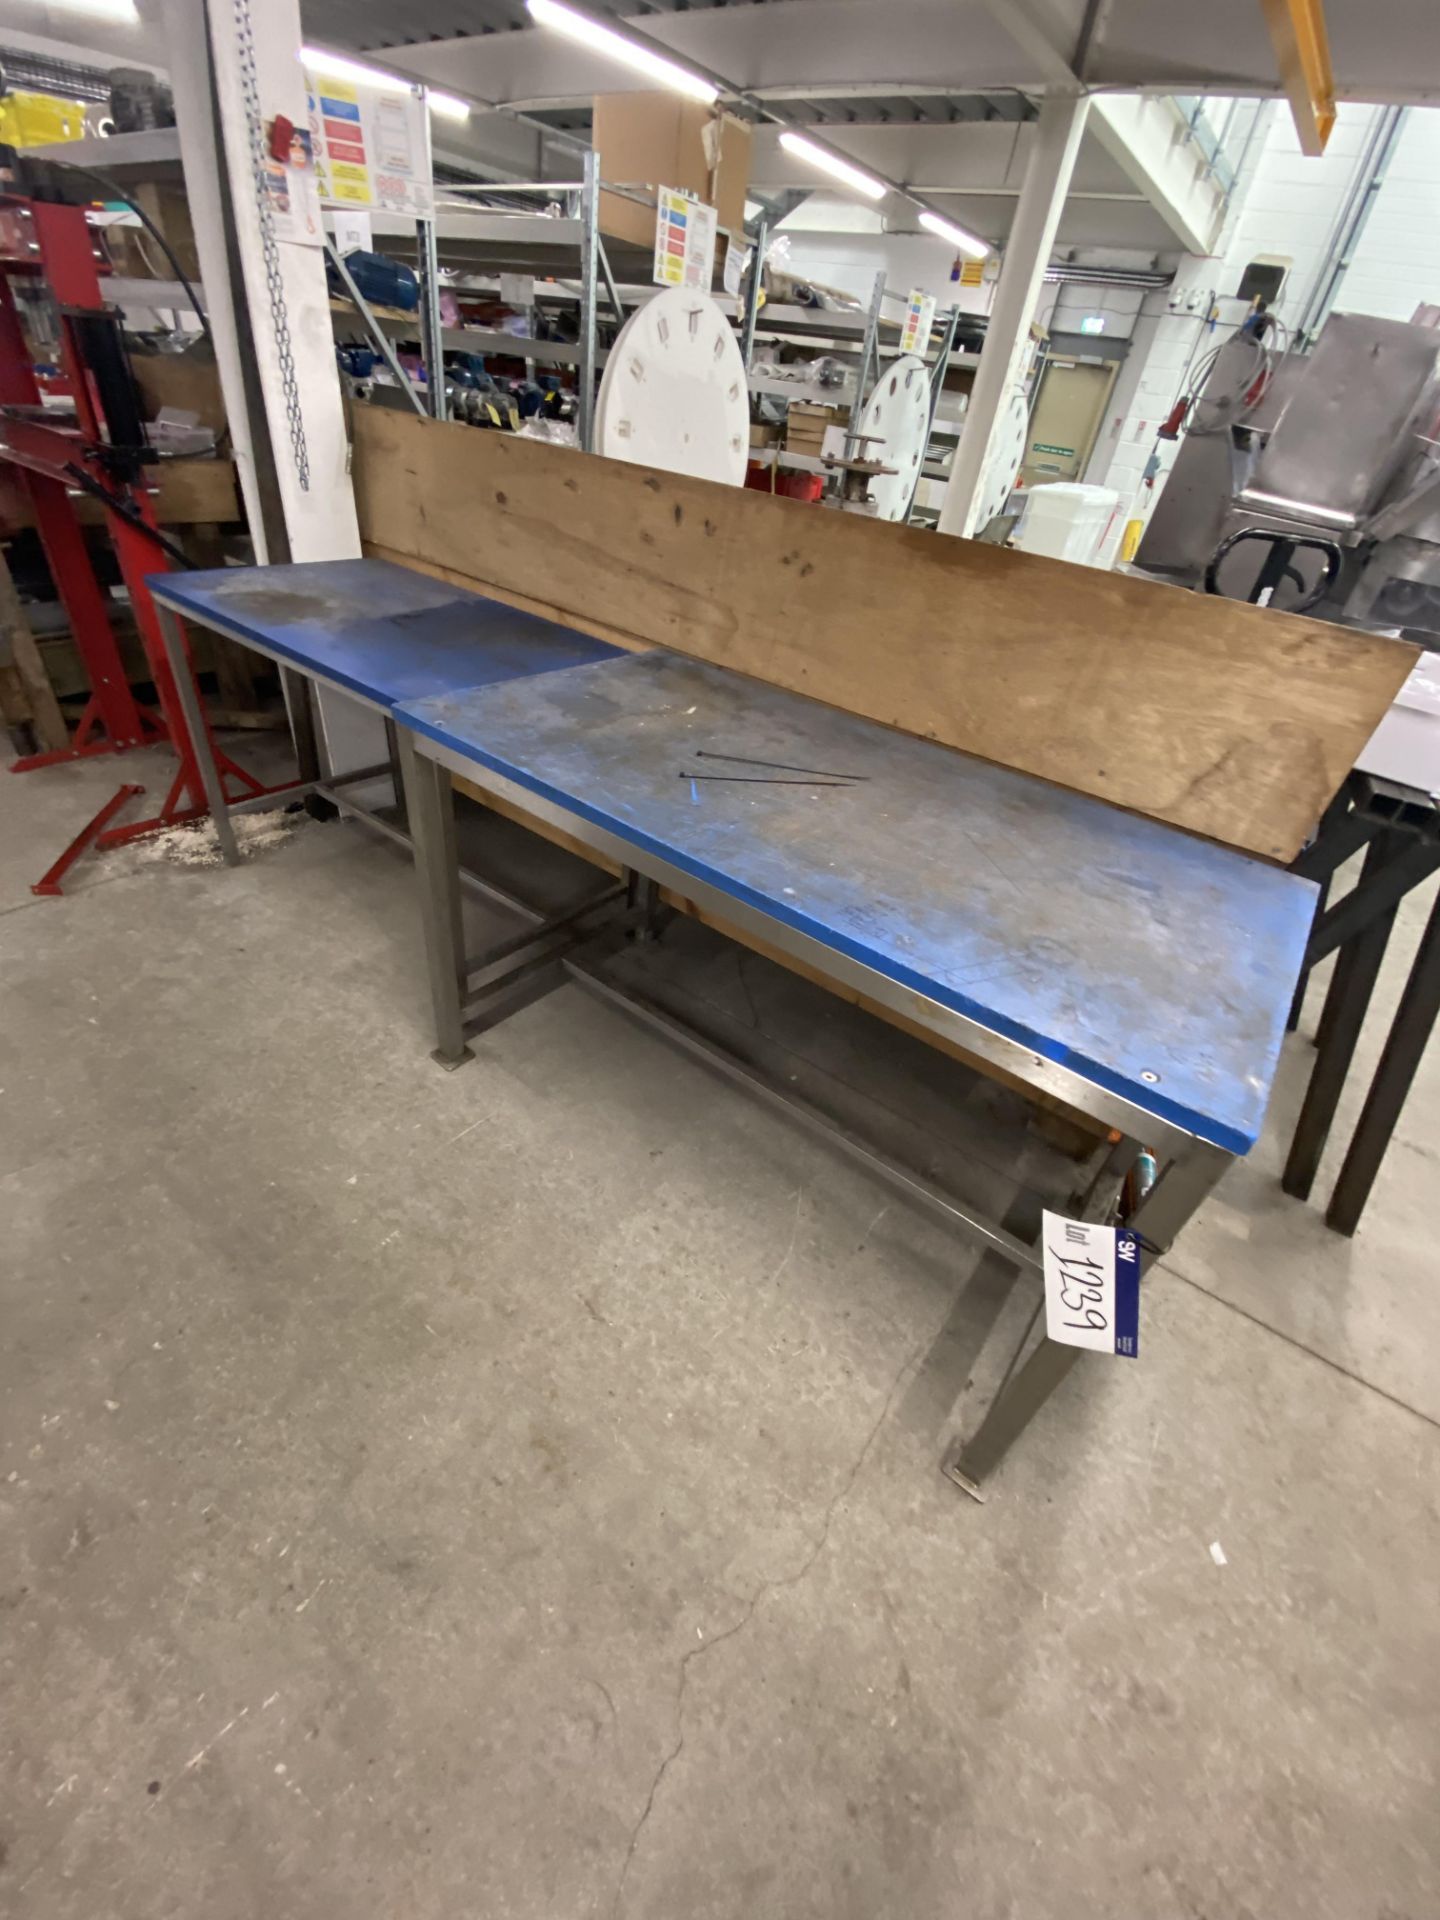 Two Stainless Steel Framed Benches, one approx. 1.35m x 700mm and one approx. 1.1m x 630mmPlease